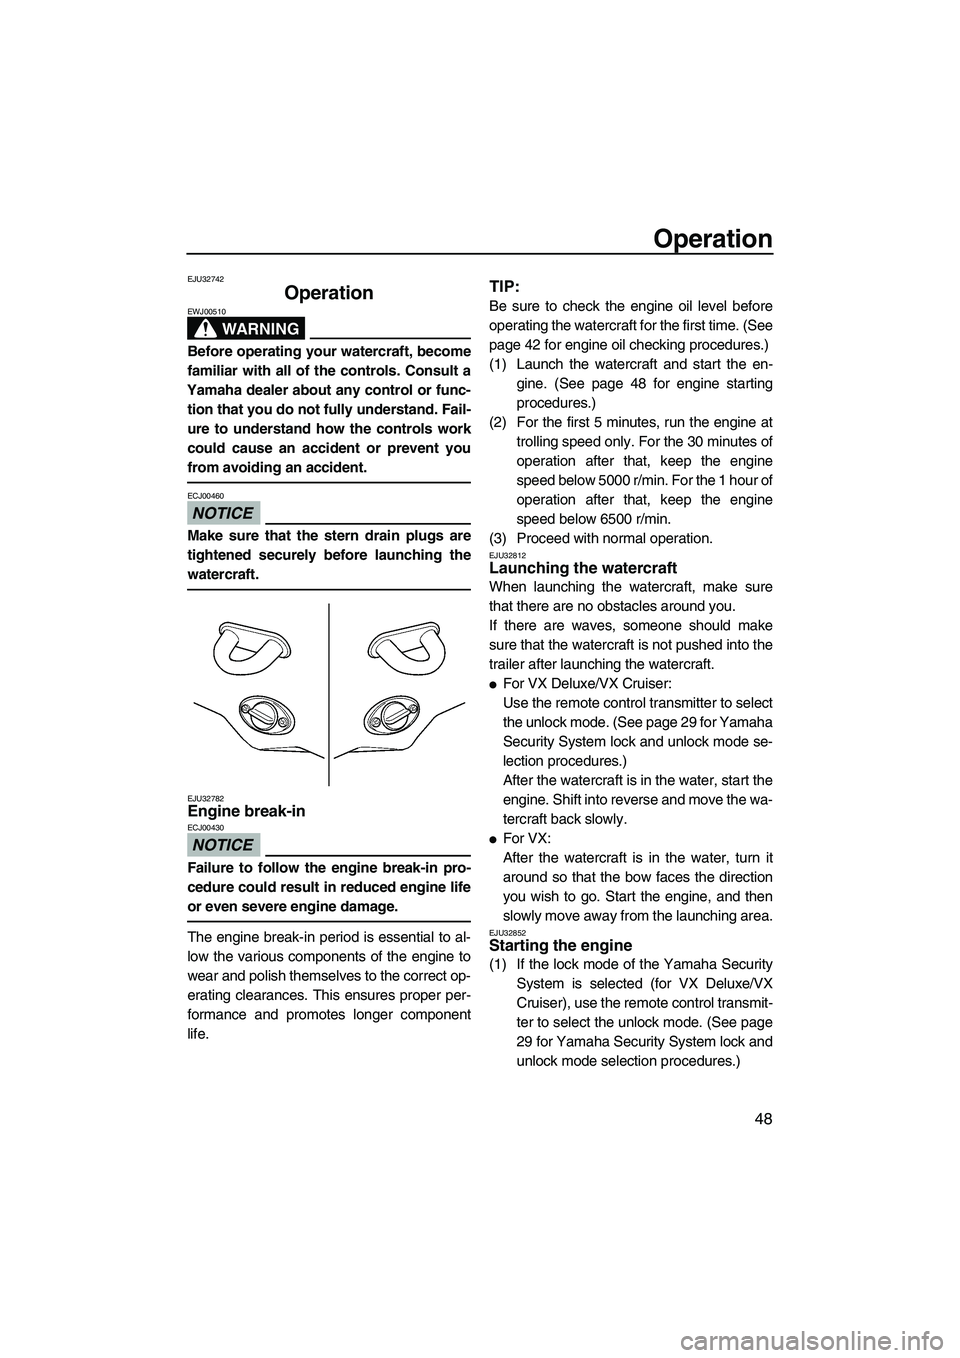 YAMAHA VX 2009  Owners Manual Operation
48
EJU32742
Operation 
WARNING
EWJ00510
Before operating your watercraft, become
familiar with all of the controls. Consult a
Yamaha dealer about any control or func-
tion that you do not fu